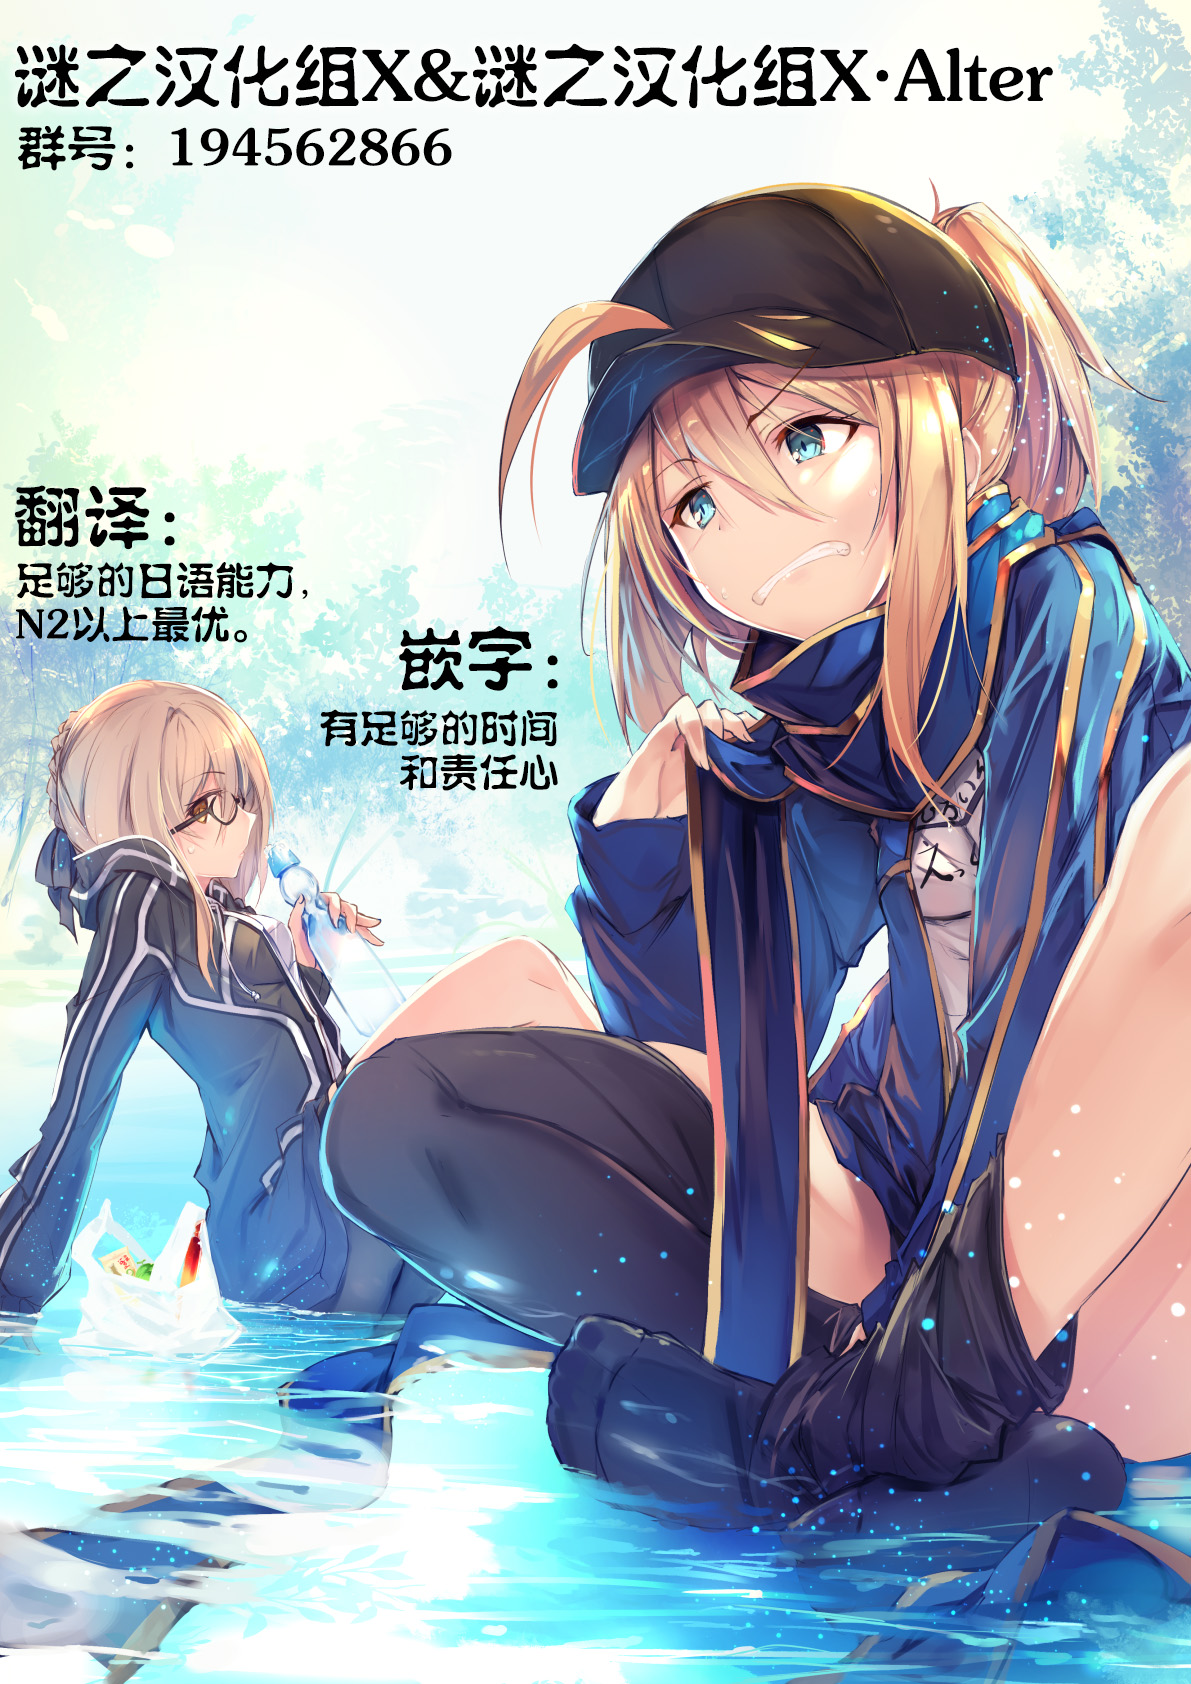 (C96) [Kenja Time (MANA)] Fate/Gentle Order 5 (Fate/Grand Order) [Chinese] [谜之汉化组X·Alter&无毒汉化组] (C96) [けんじゃたいむ (MANA)] Fate/Gentle Order 5 (Fate/Grand Order) [中国翻訳]